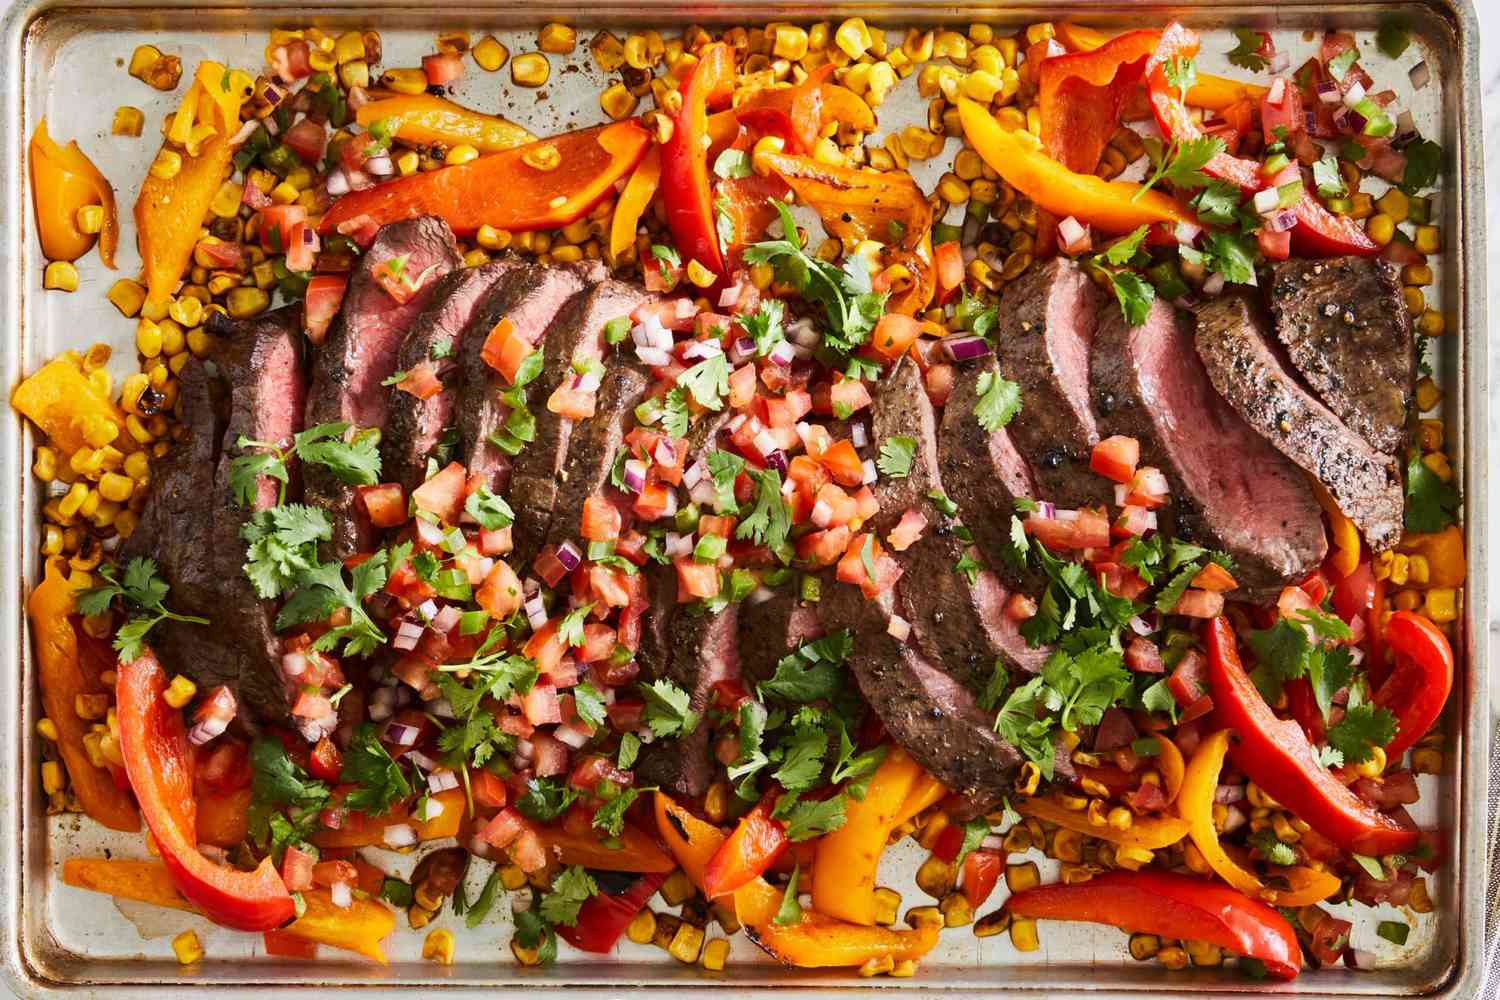 southwestern beef sheet pan dinner with sliced steak, corn kernels, bell pepper slices, pico de gallo, and cilantro leaves